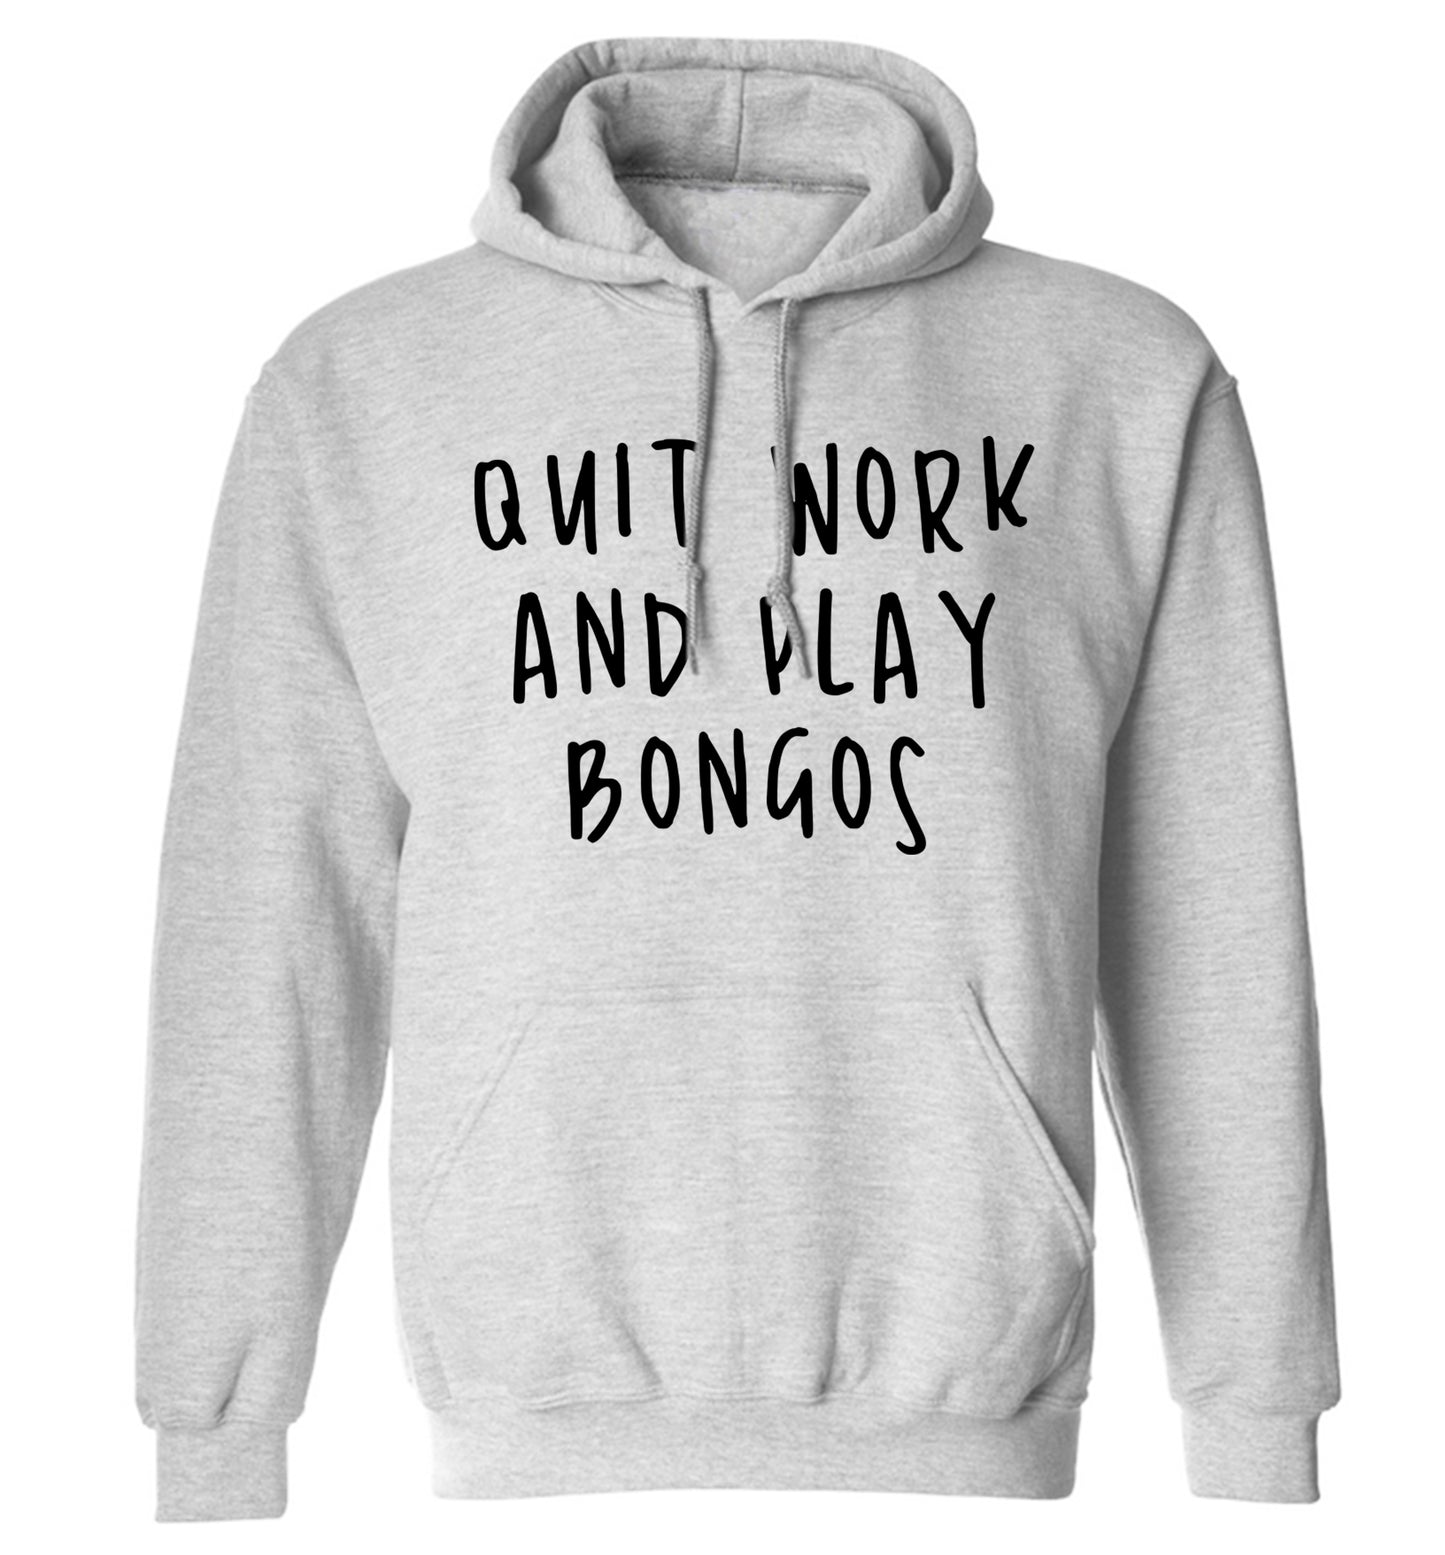 Quit work and play bongos adults unisex grey hoodie 2XL